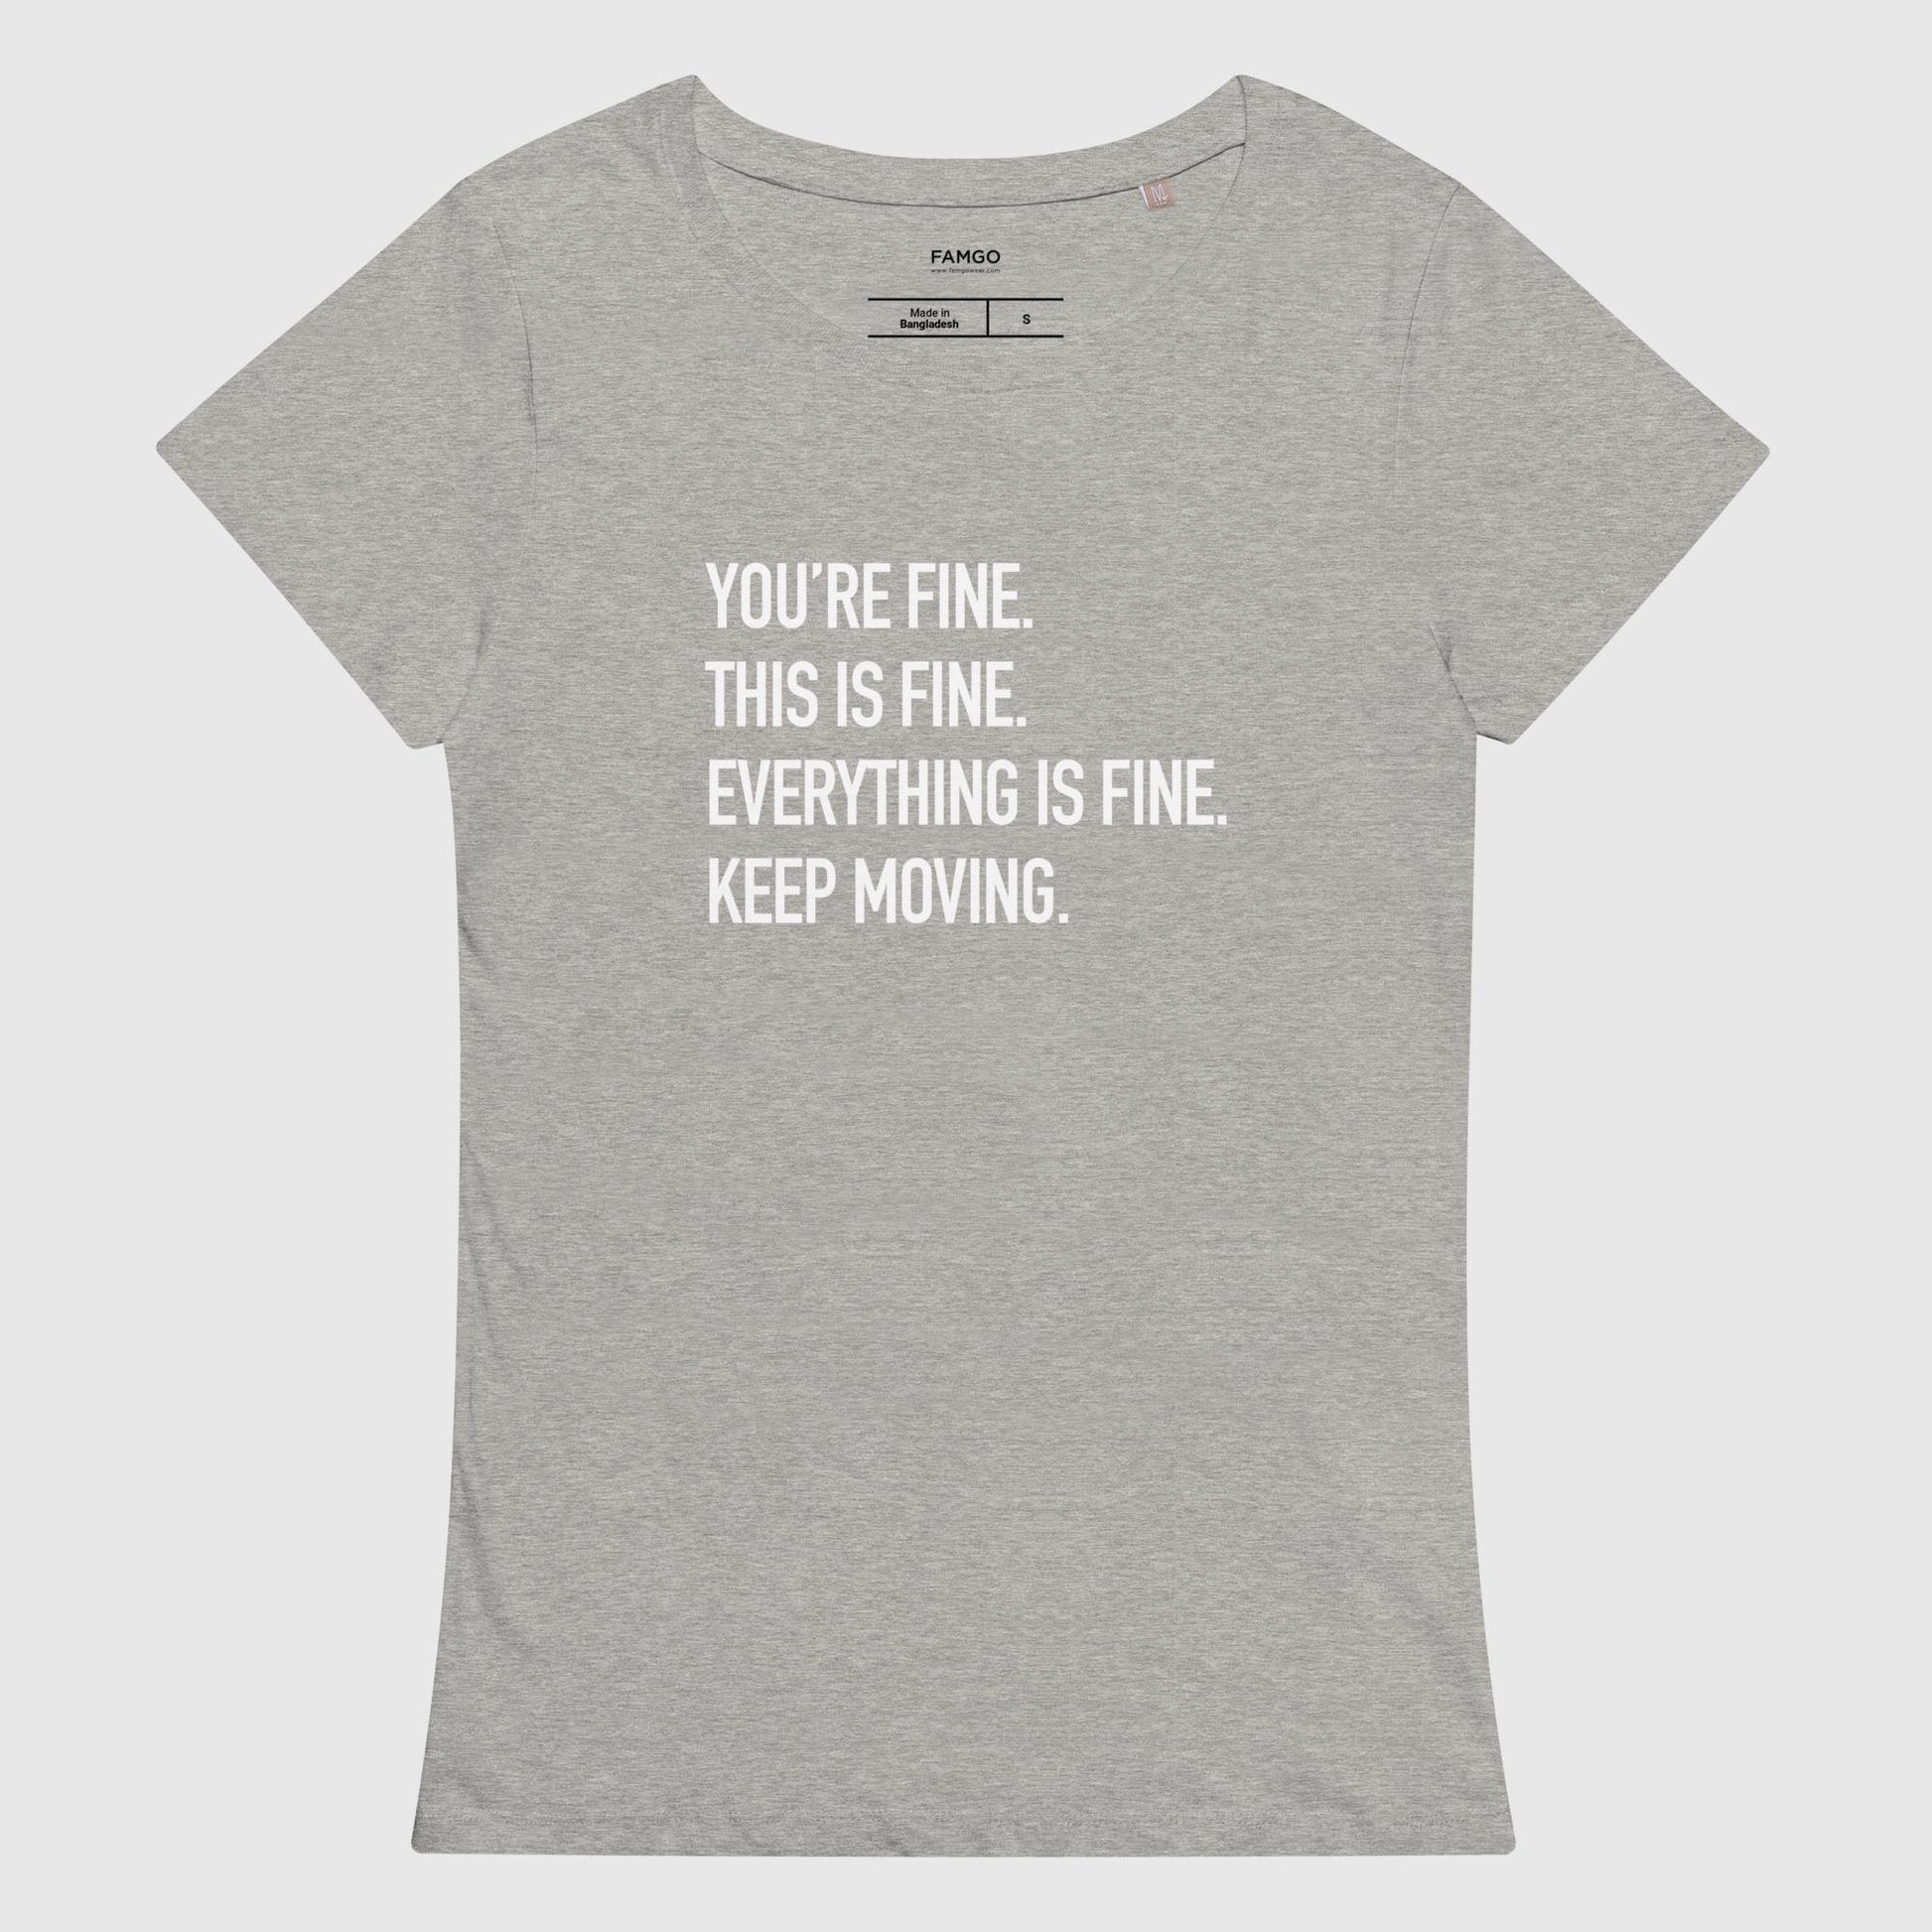 Women's gray melange organic cotton t-shirt that features Courtney Dauwalter's mantra, "You're fine. This is fine. Everything is fine. Keep moving."